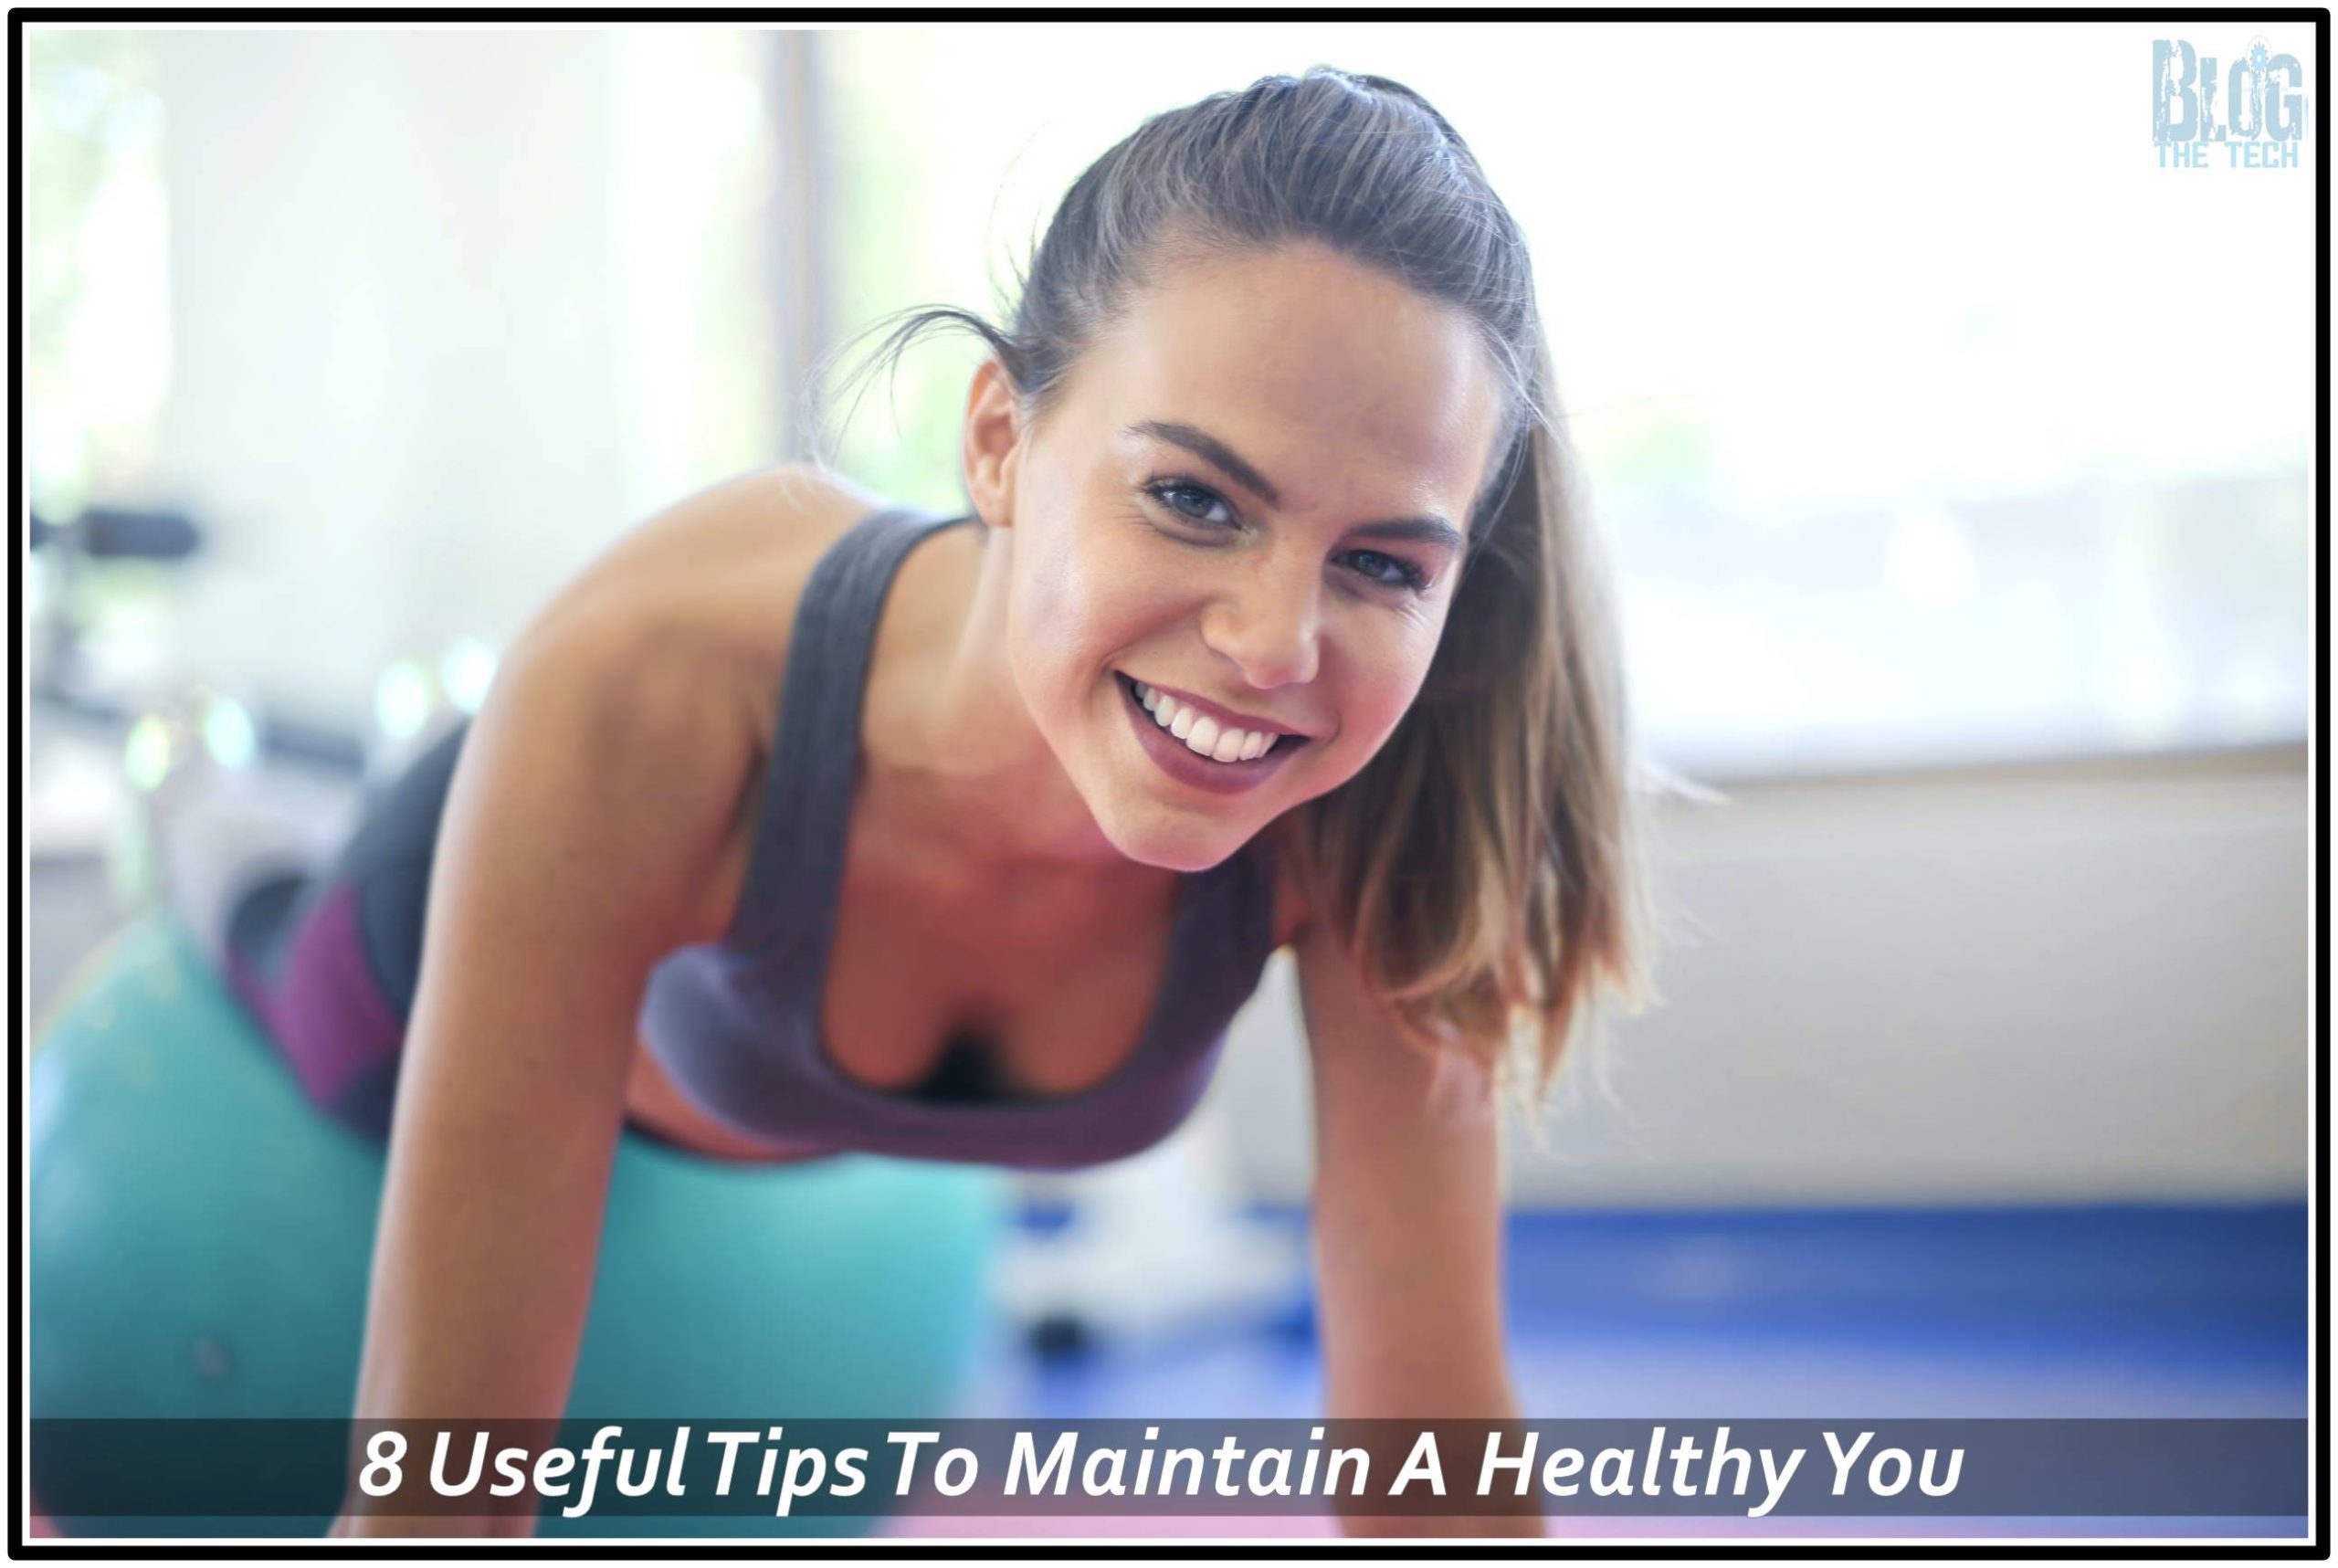 8 Useful Tips To Maintain A Healthy You